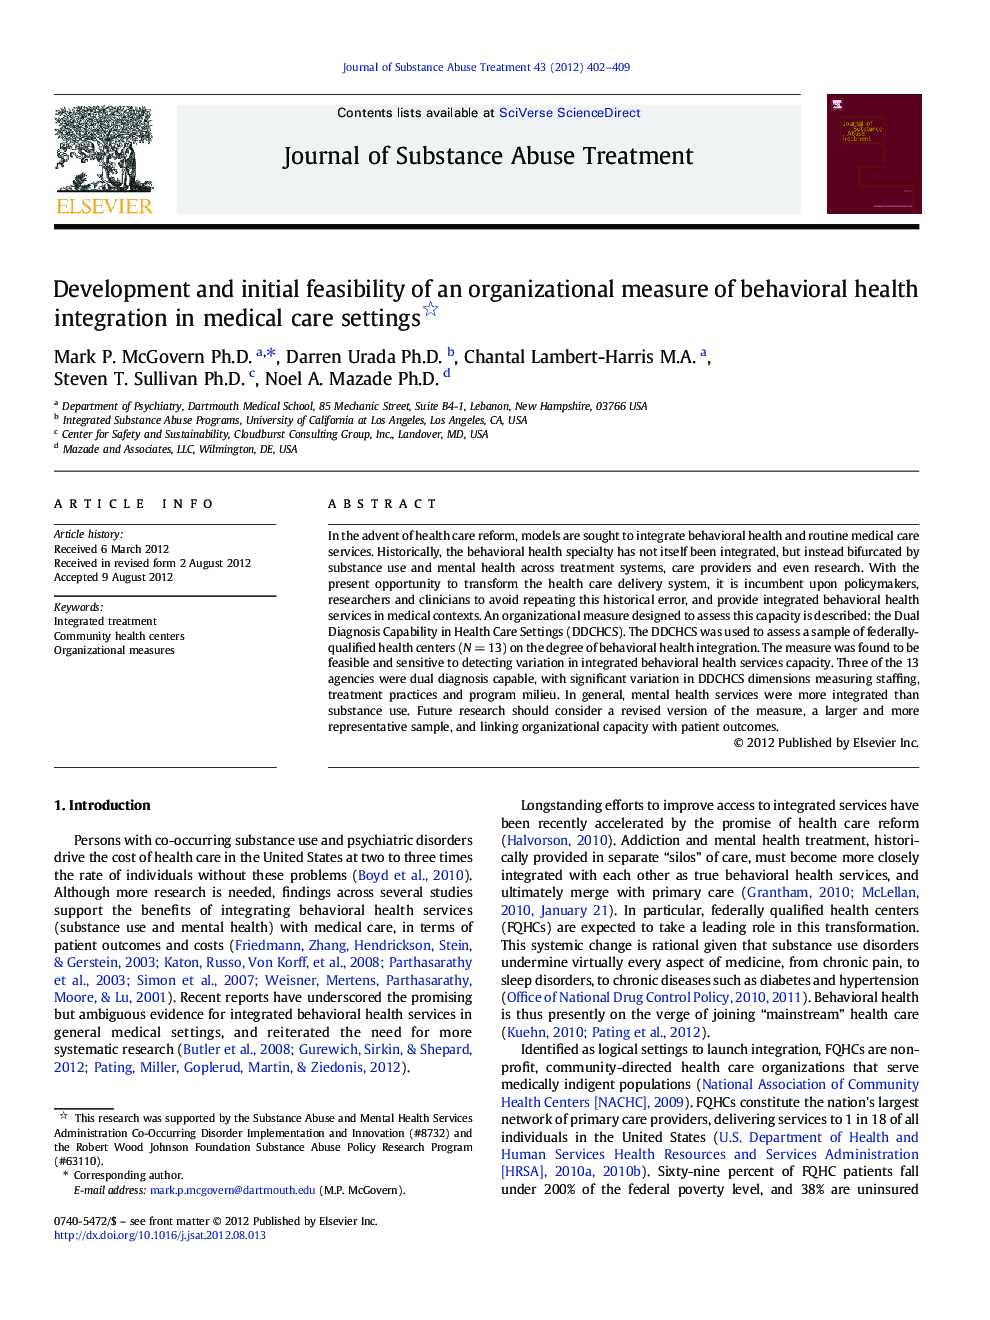 Development and initial feasibility of an organizational measure of behavioral health integration in medical care settings 